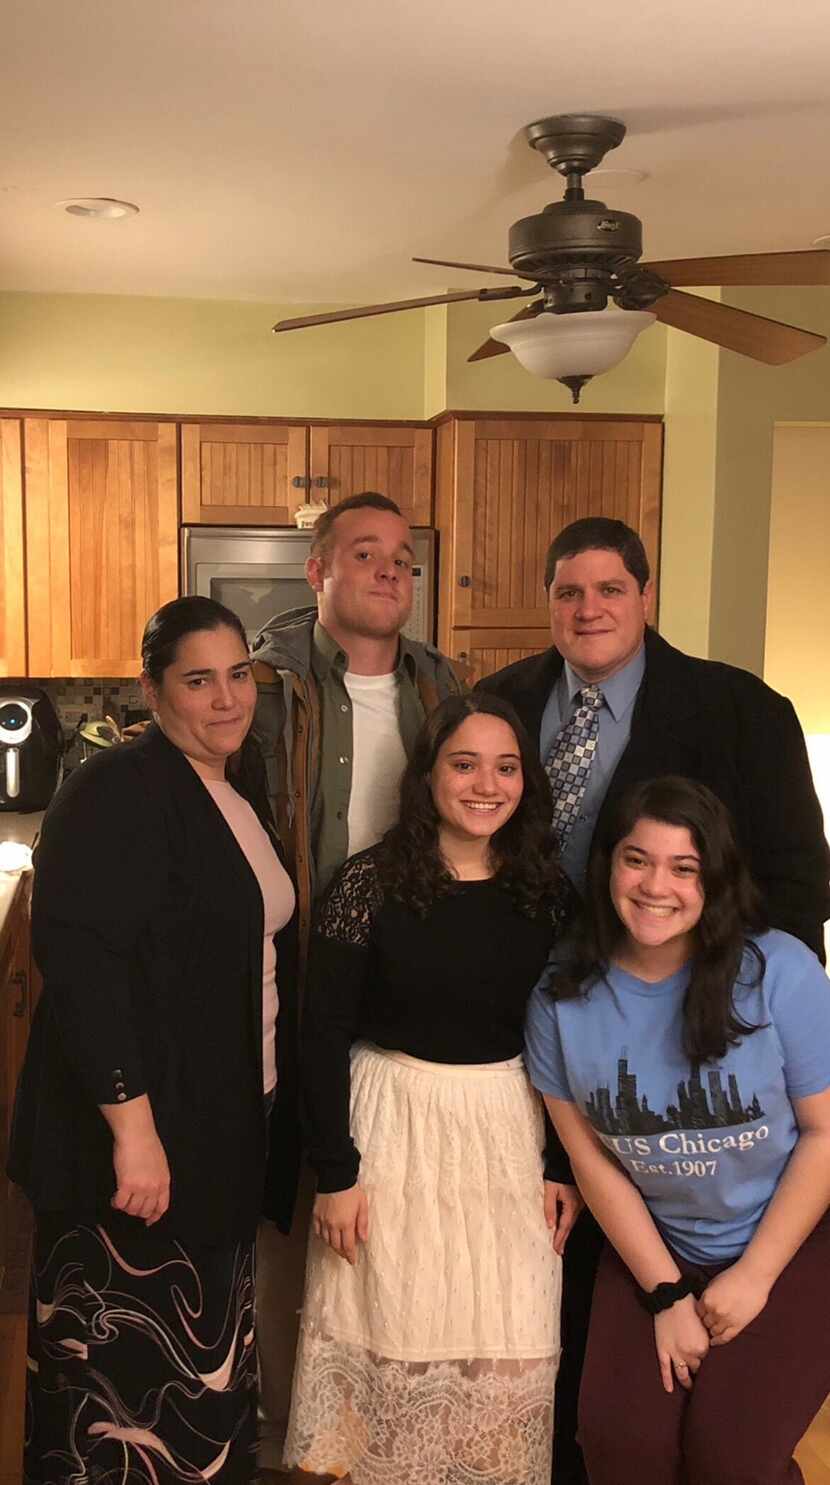 A family photo from when Edgar Tirado Jr. visited his parents' home in the Chicago suburbs.